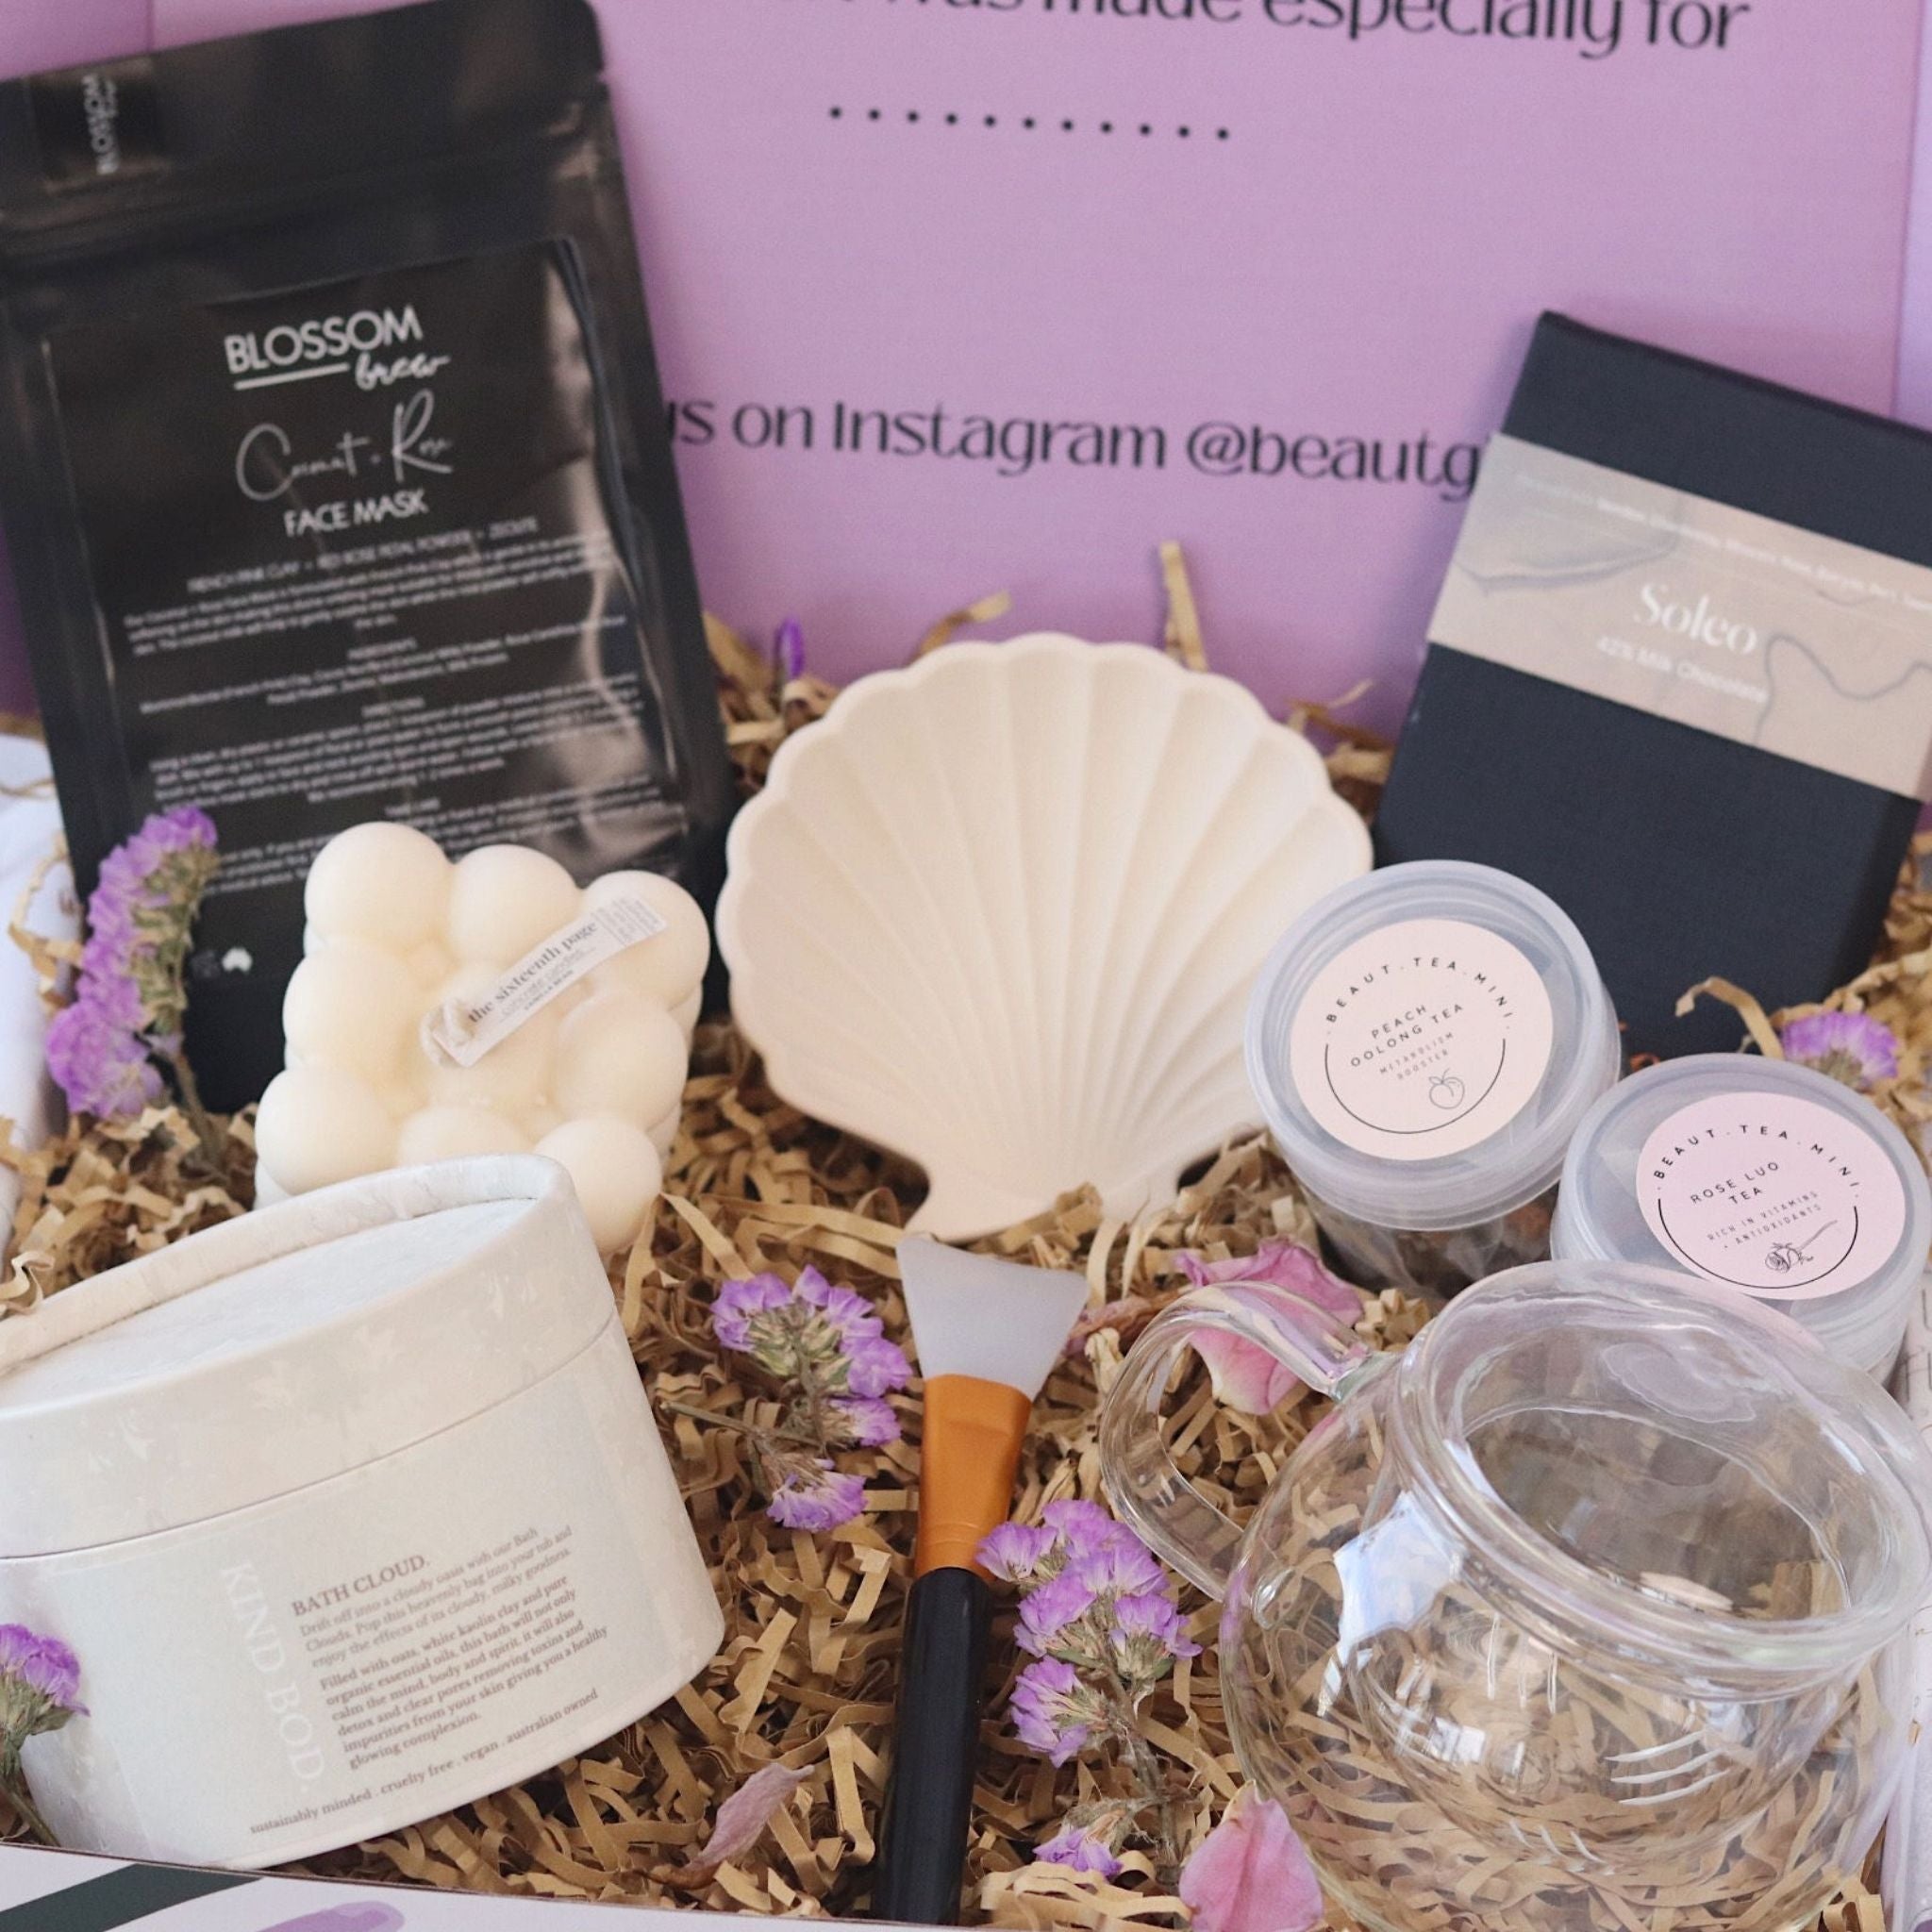 beaut box filled with pamper items, tea, chocolate and home decor